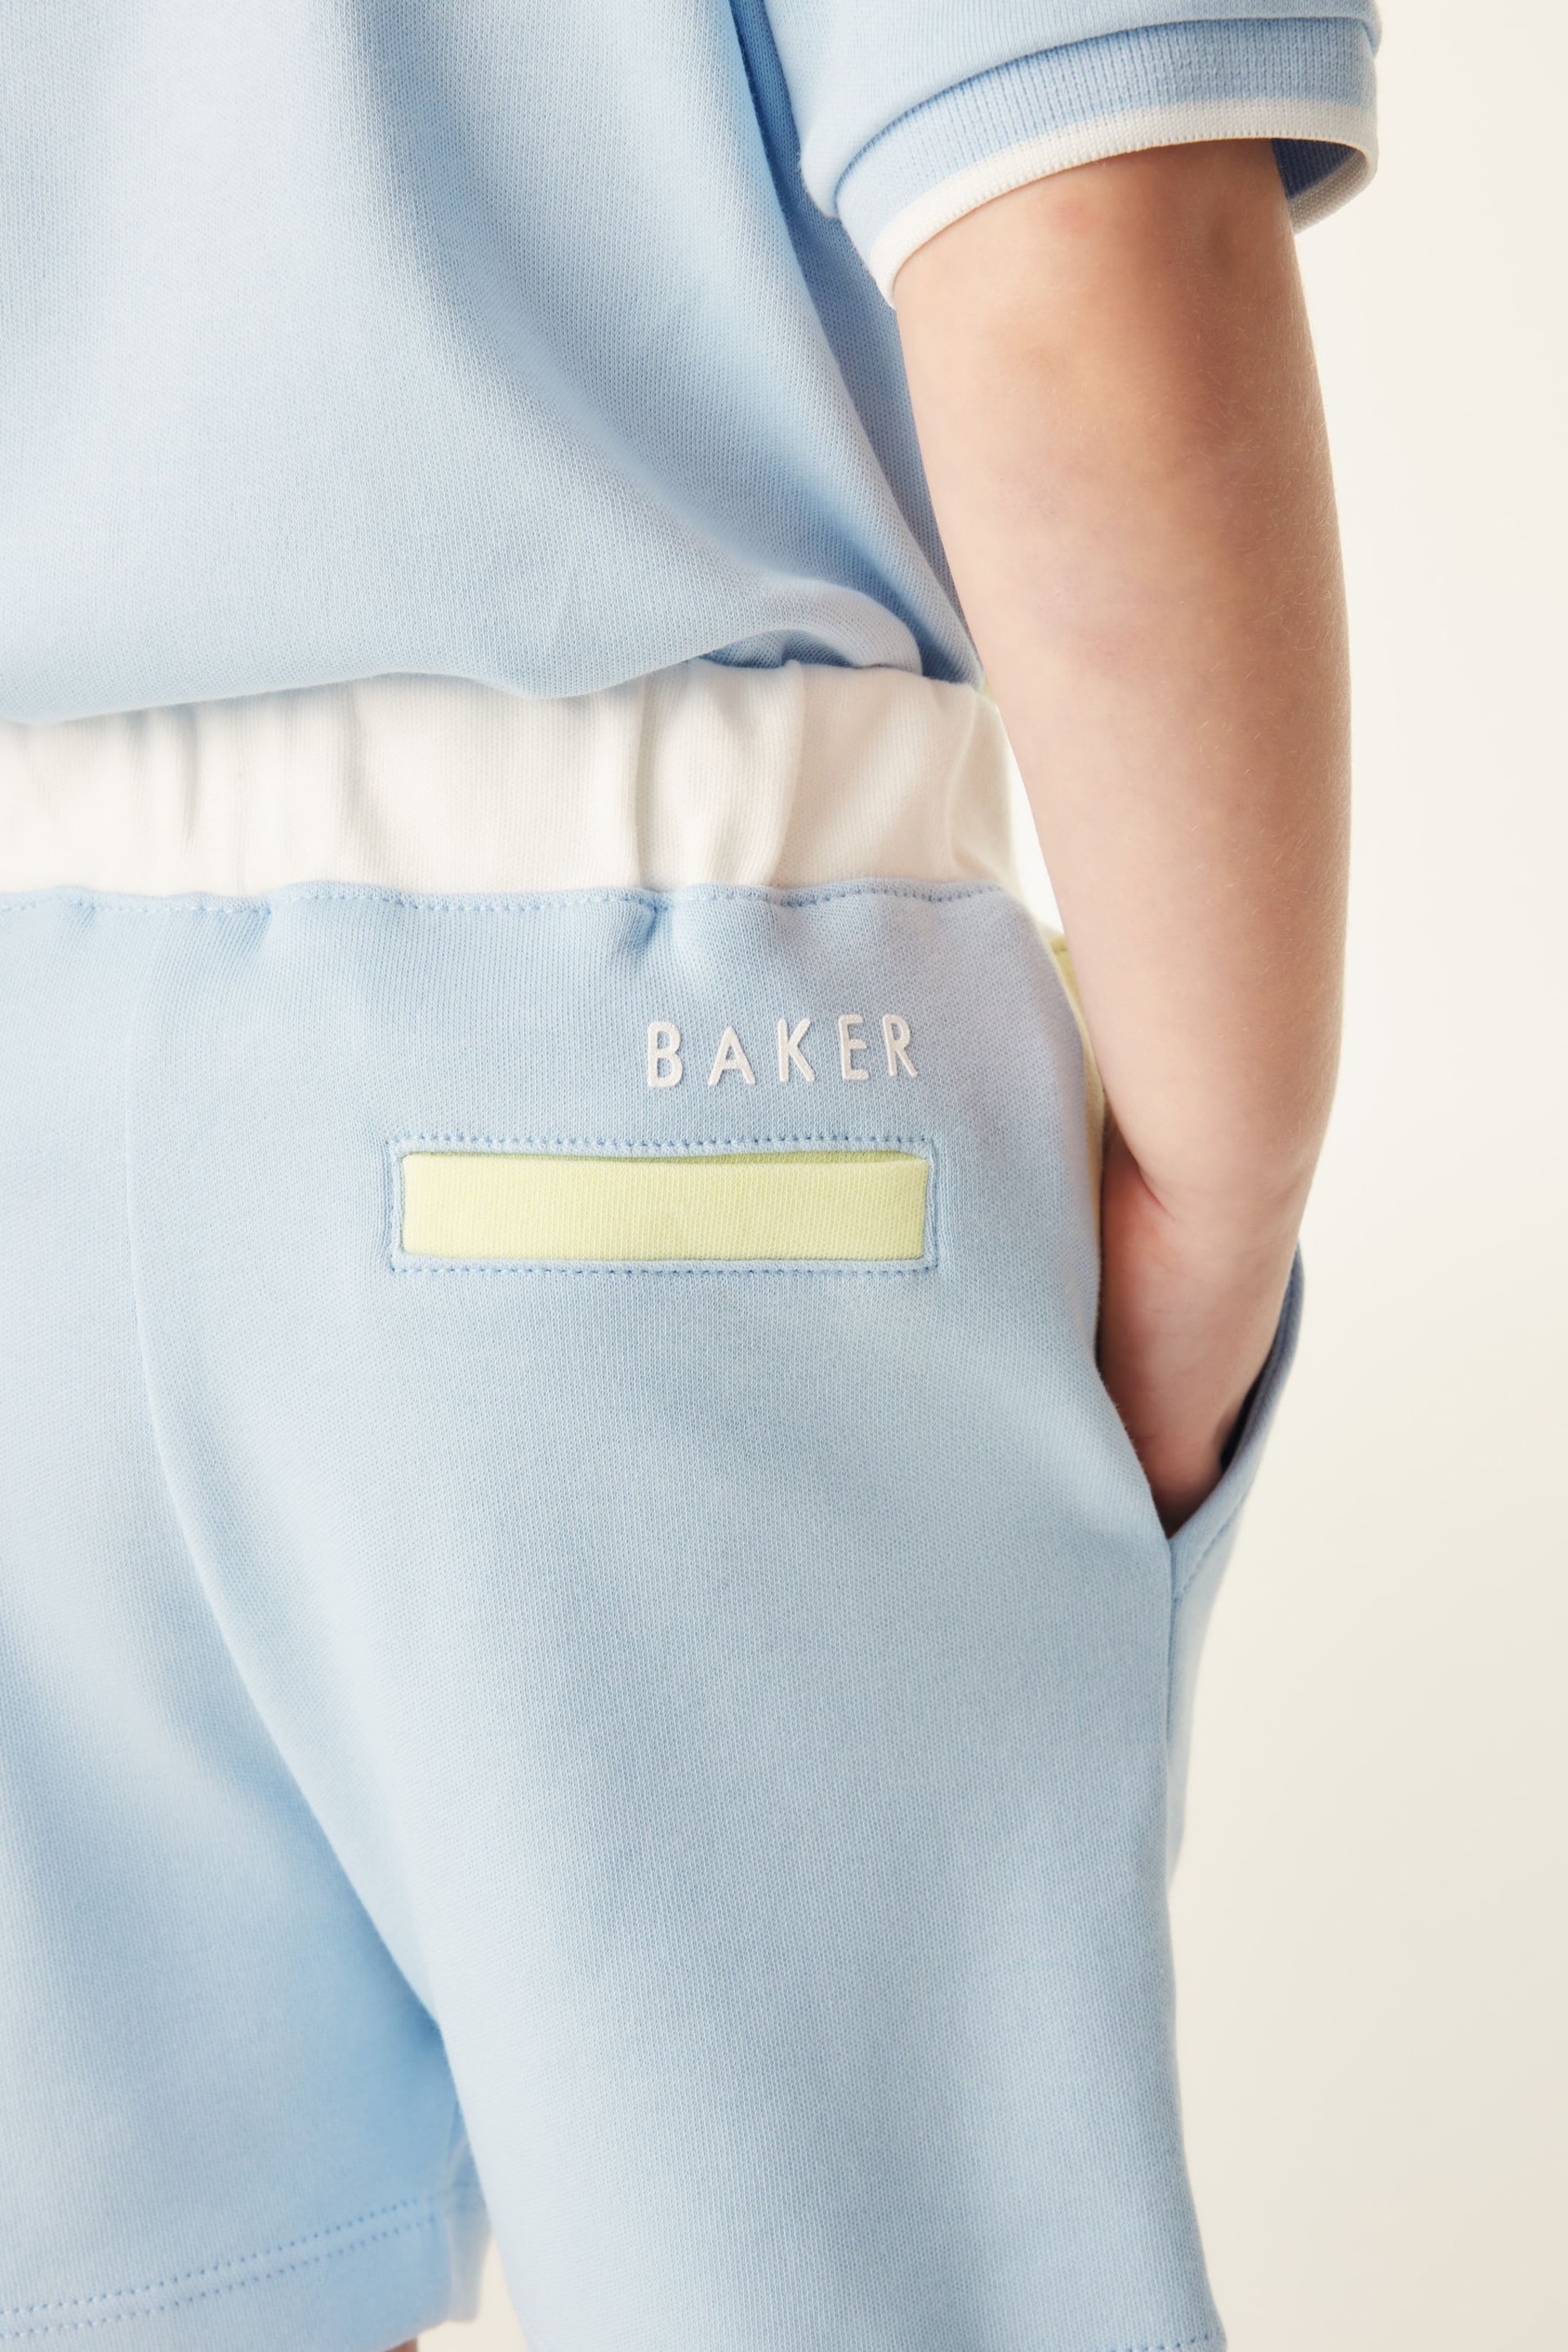 Baker by Ted Baker Colourblock Polo Shirt and Short Set - Image 7 of 12